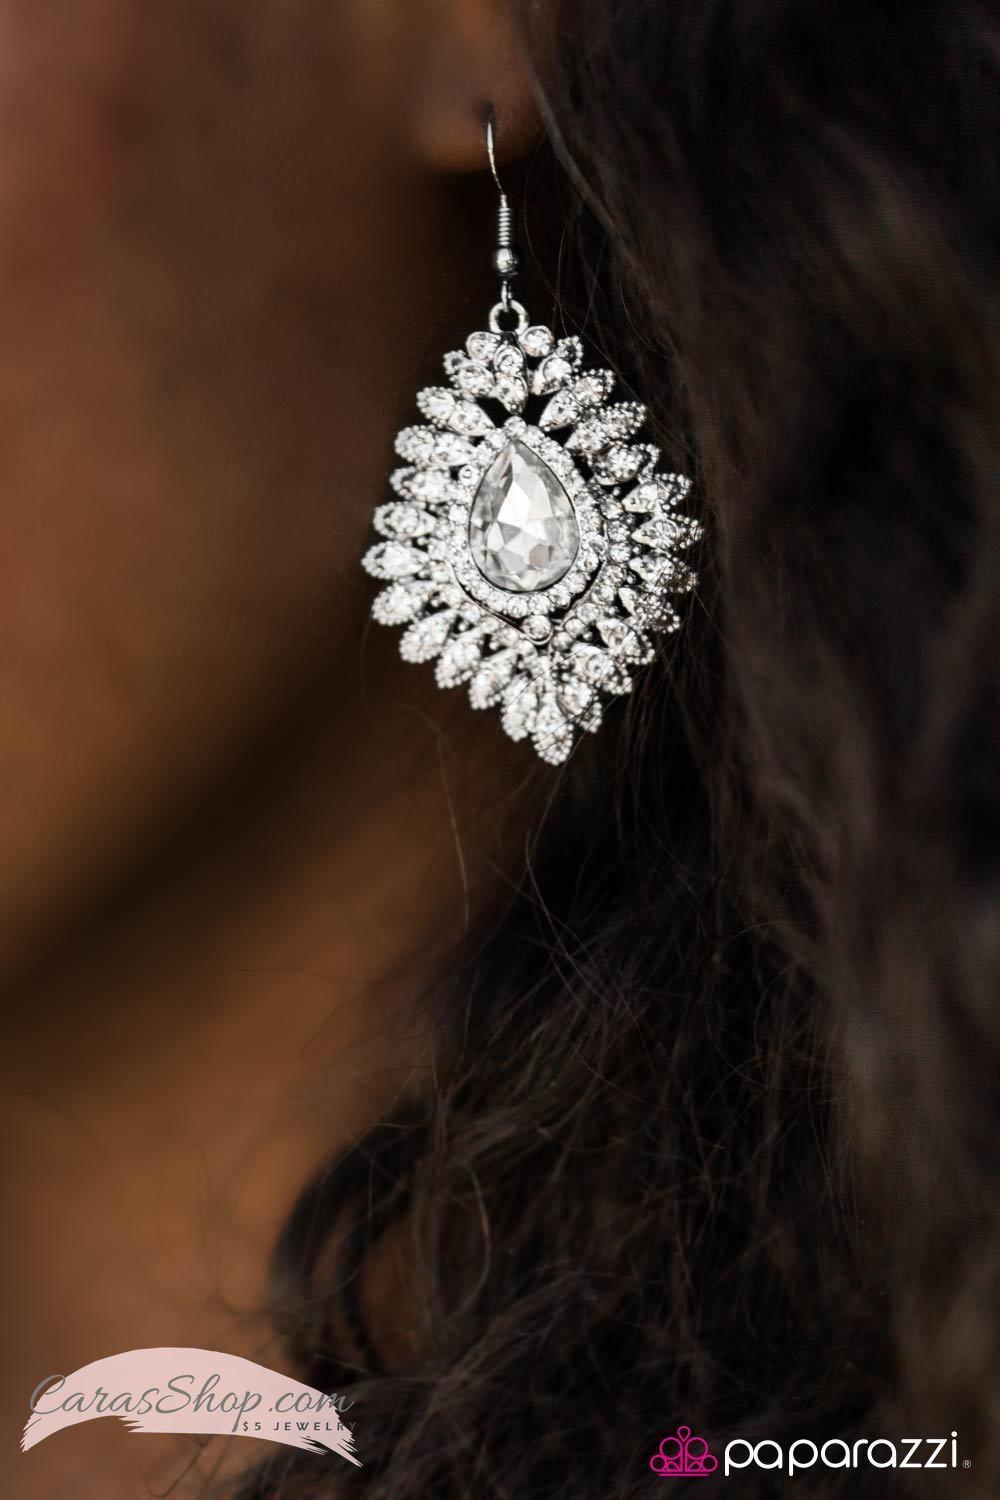 DIVA-de and Conquer White Rhinestone Earrings - Paparazzi Accessories-CarasShop.com - $5 Jewelry by Cara Jewels